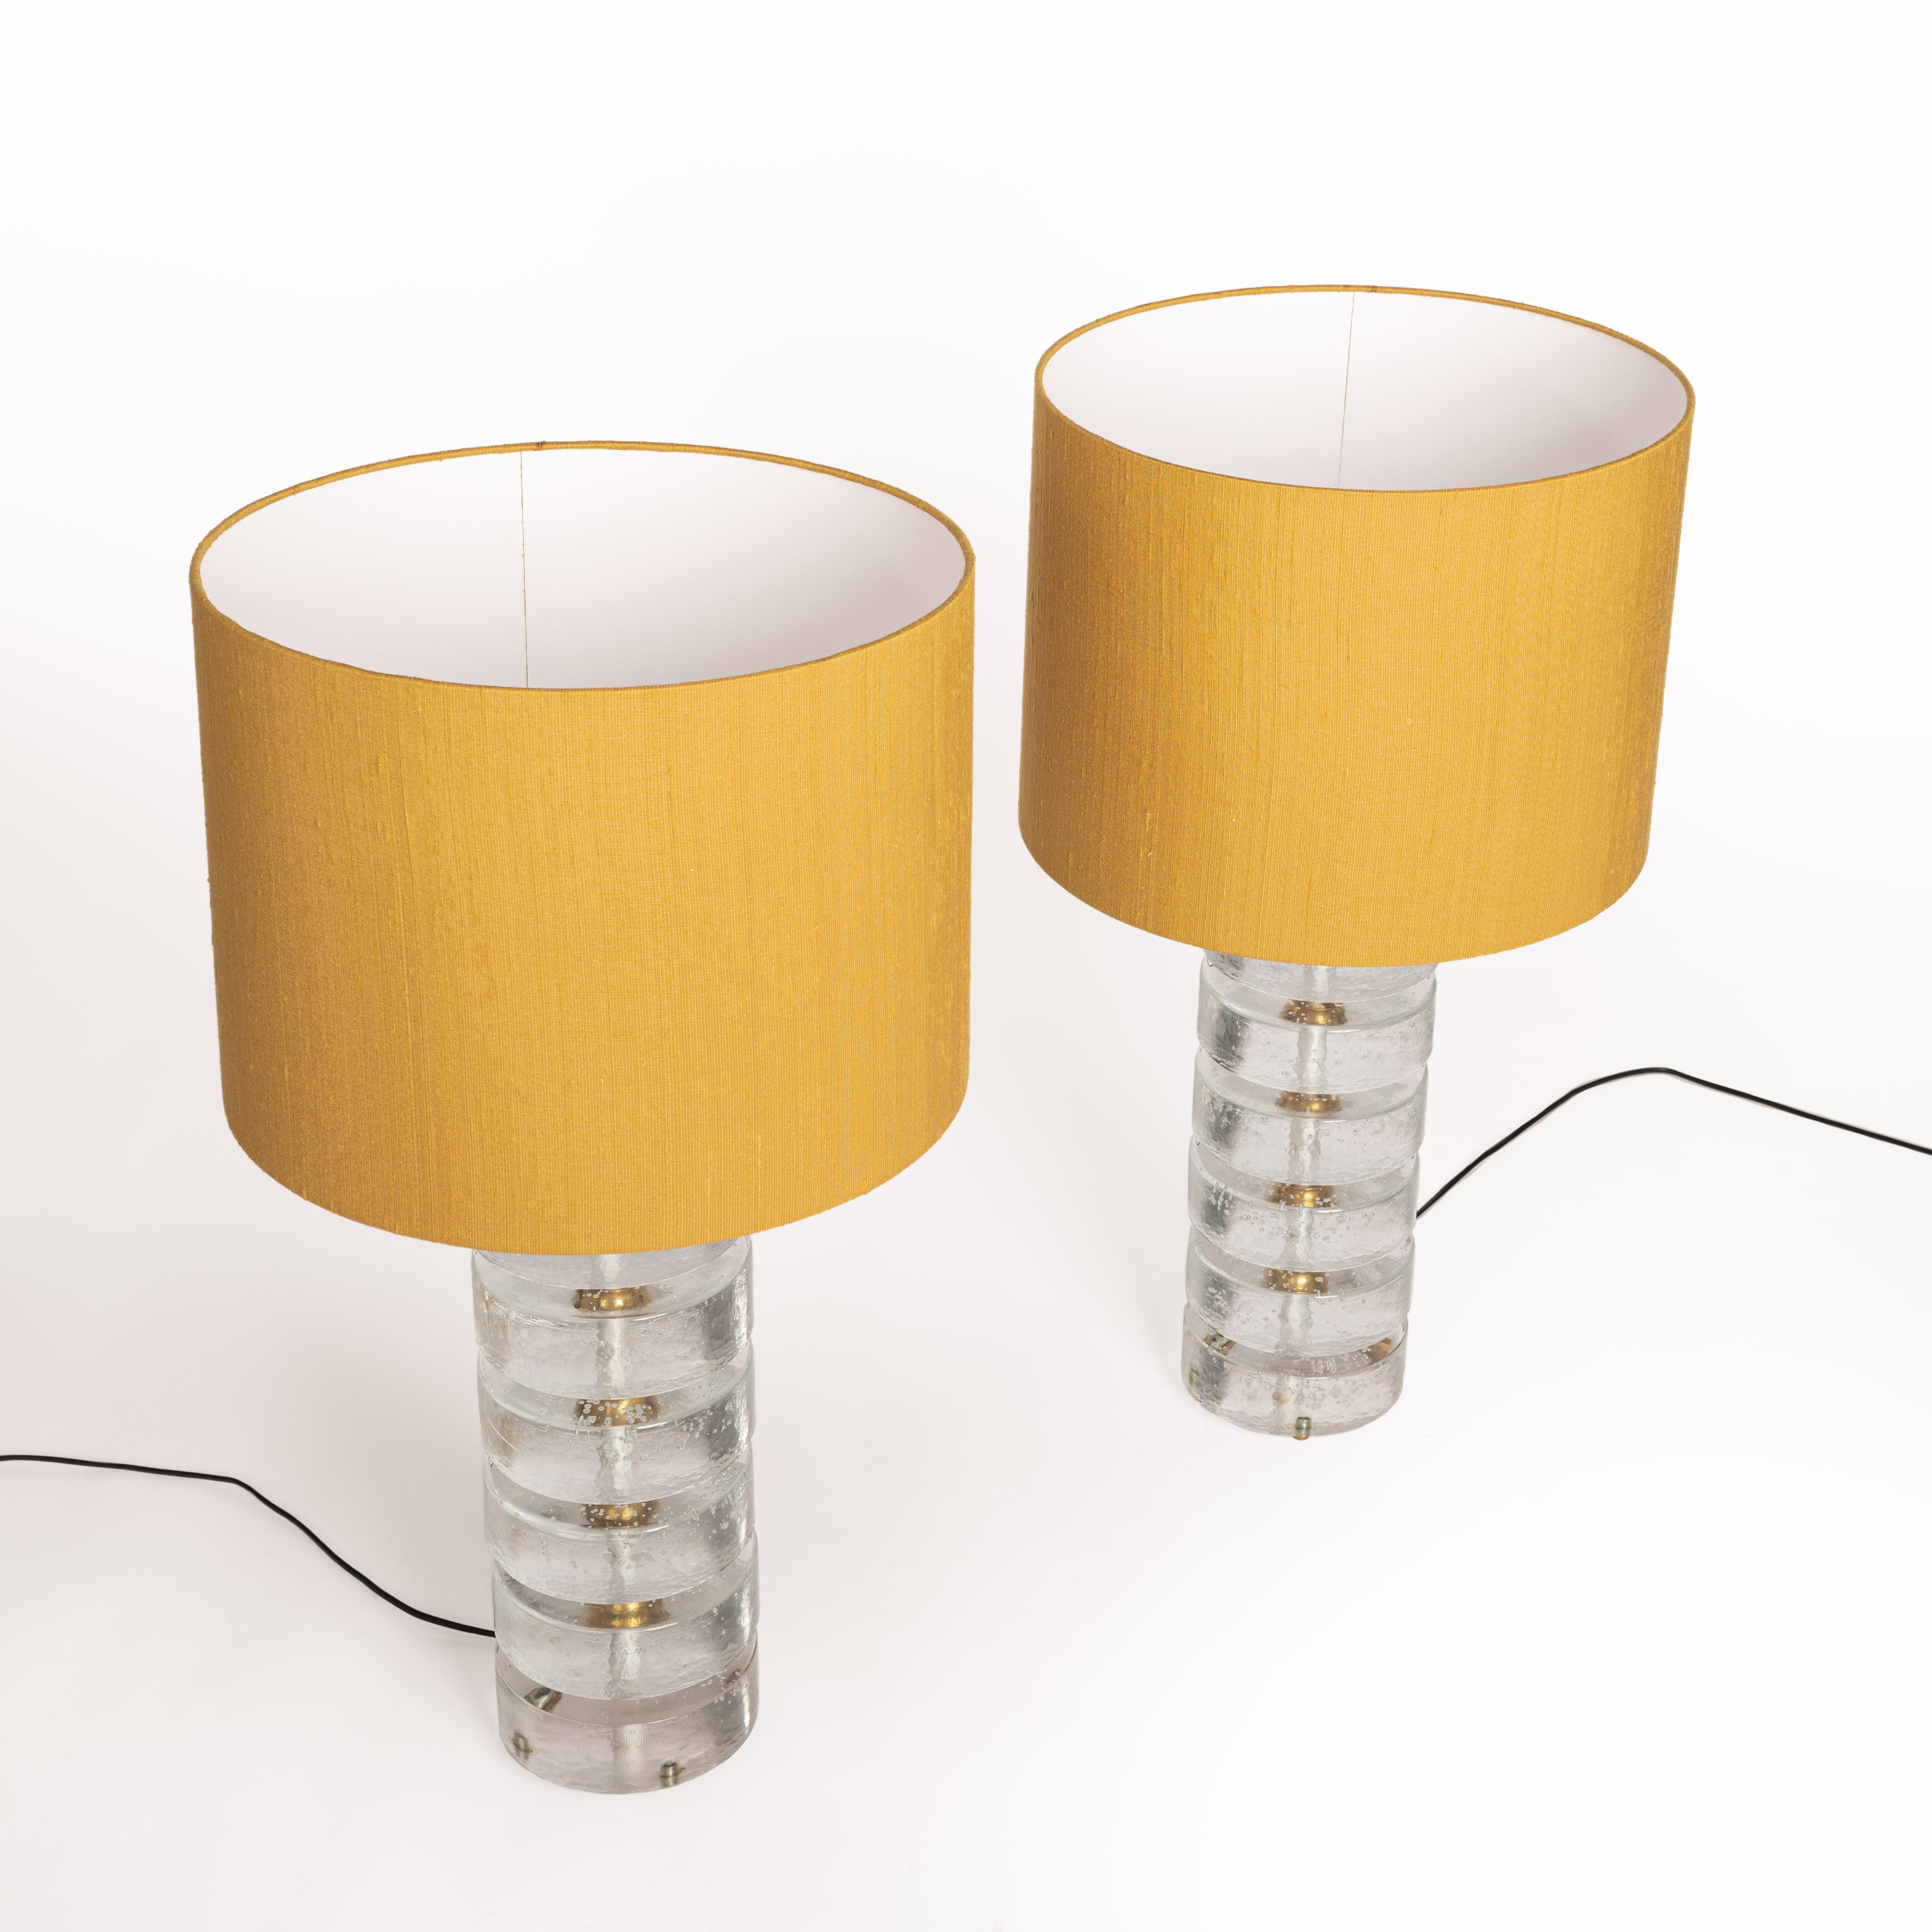 Pair of cylindrical shaped Murano glass table lamps with brass mounting.
The feet are built up of several round glass slices (diameter 16cm x height 5cm) 
and brass supports.
Hand-manufactured lamp shades in mustard-yellow bourette silk and